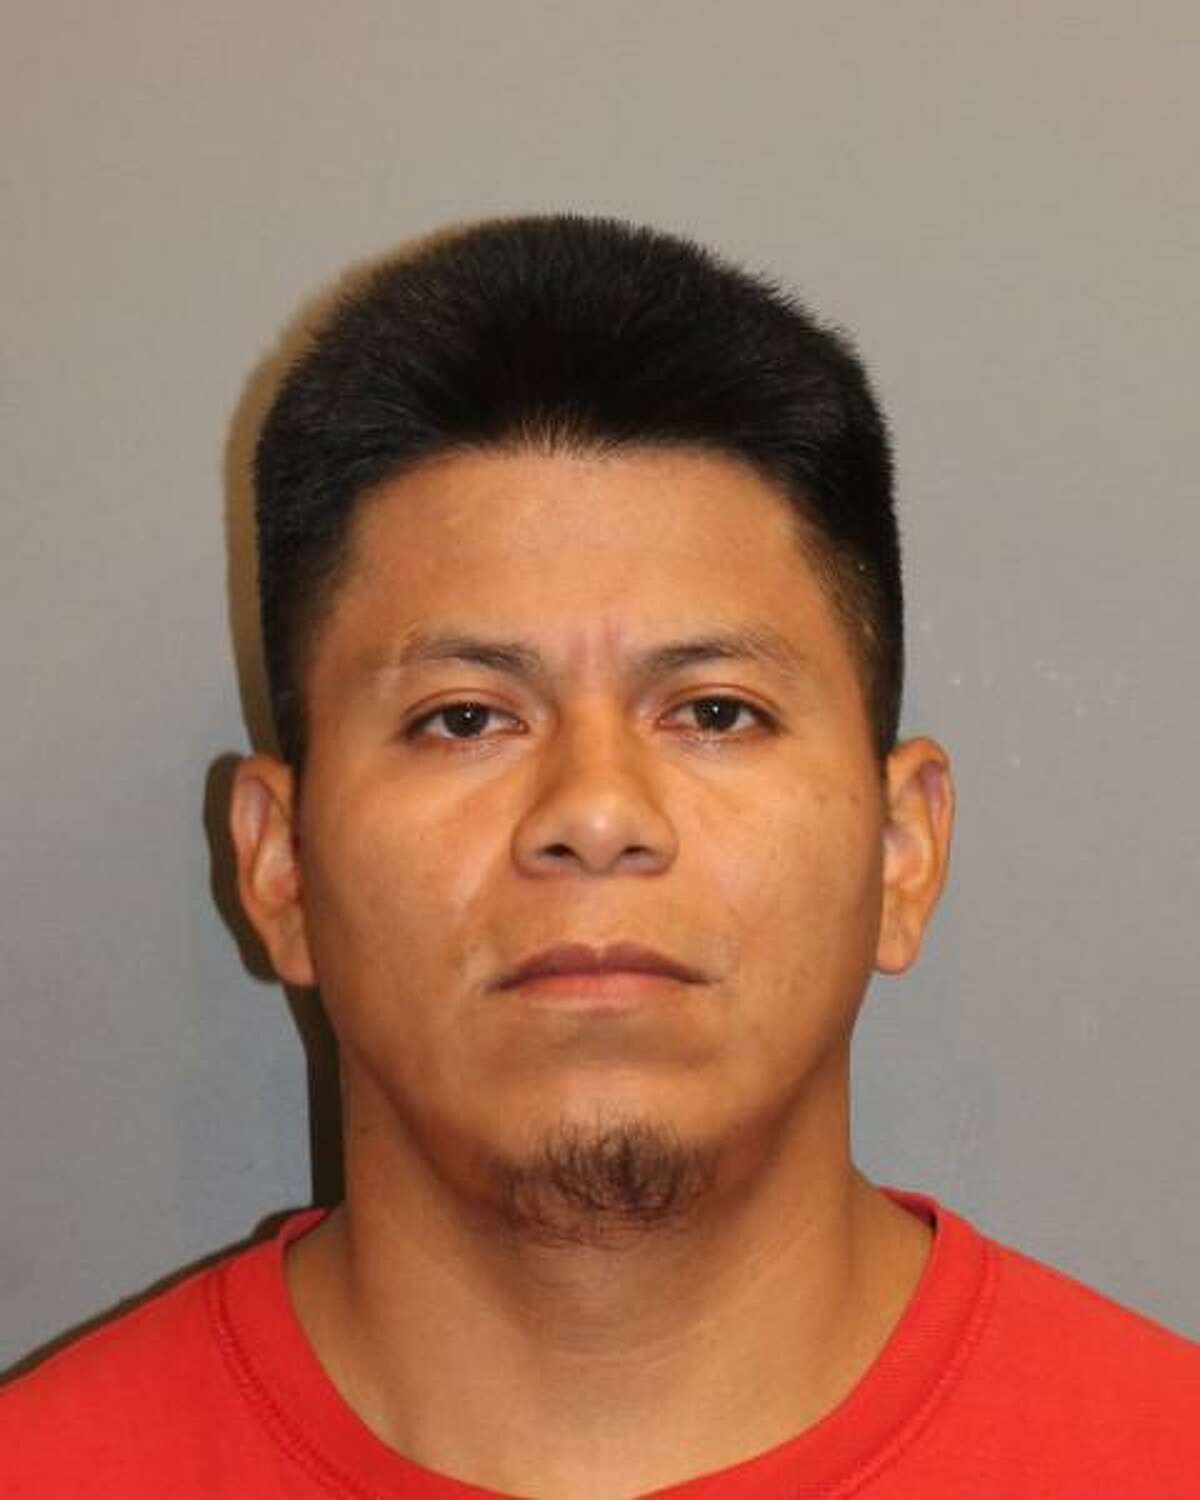 Eddy Puchaicela-Lara was charged with first-degree sexual assault, illegal sexual contact with a victim under the age of 16, and second-degree unlawful restraint, Norwalk police said.